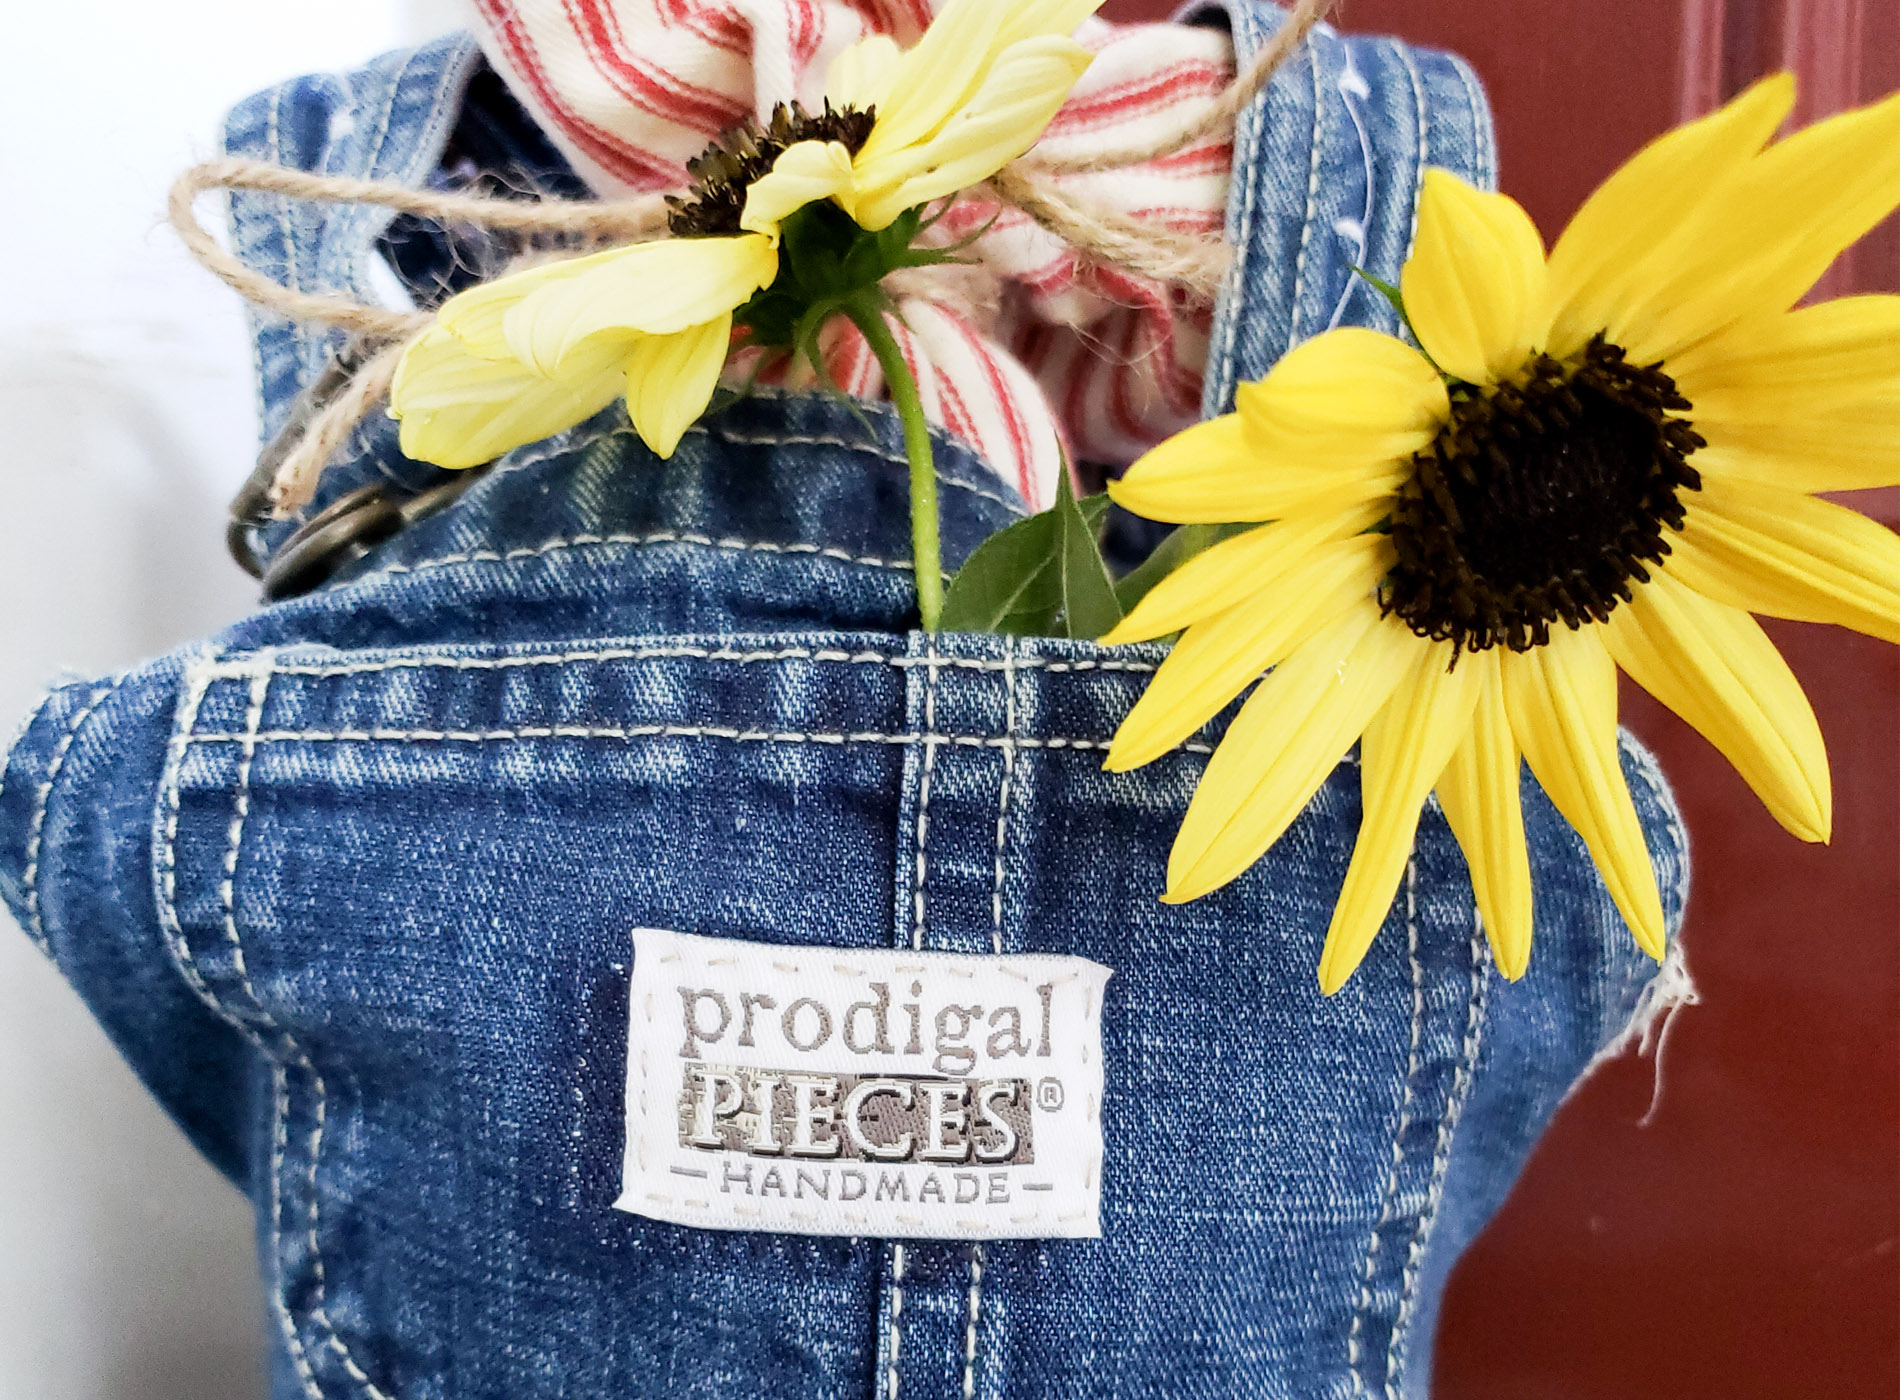 Featured DIY Doorstop from Upcycled Baby Bib Overalls by Larissa of Prodigal Pieces | prodigalpieces.com #prodigalpieces #